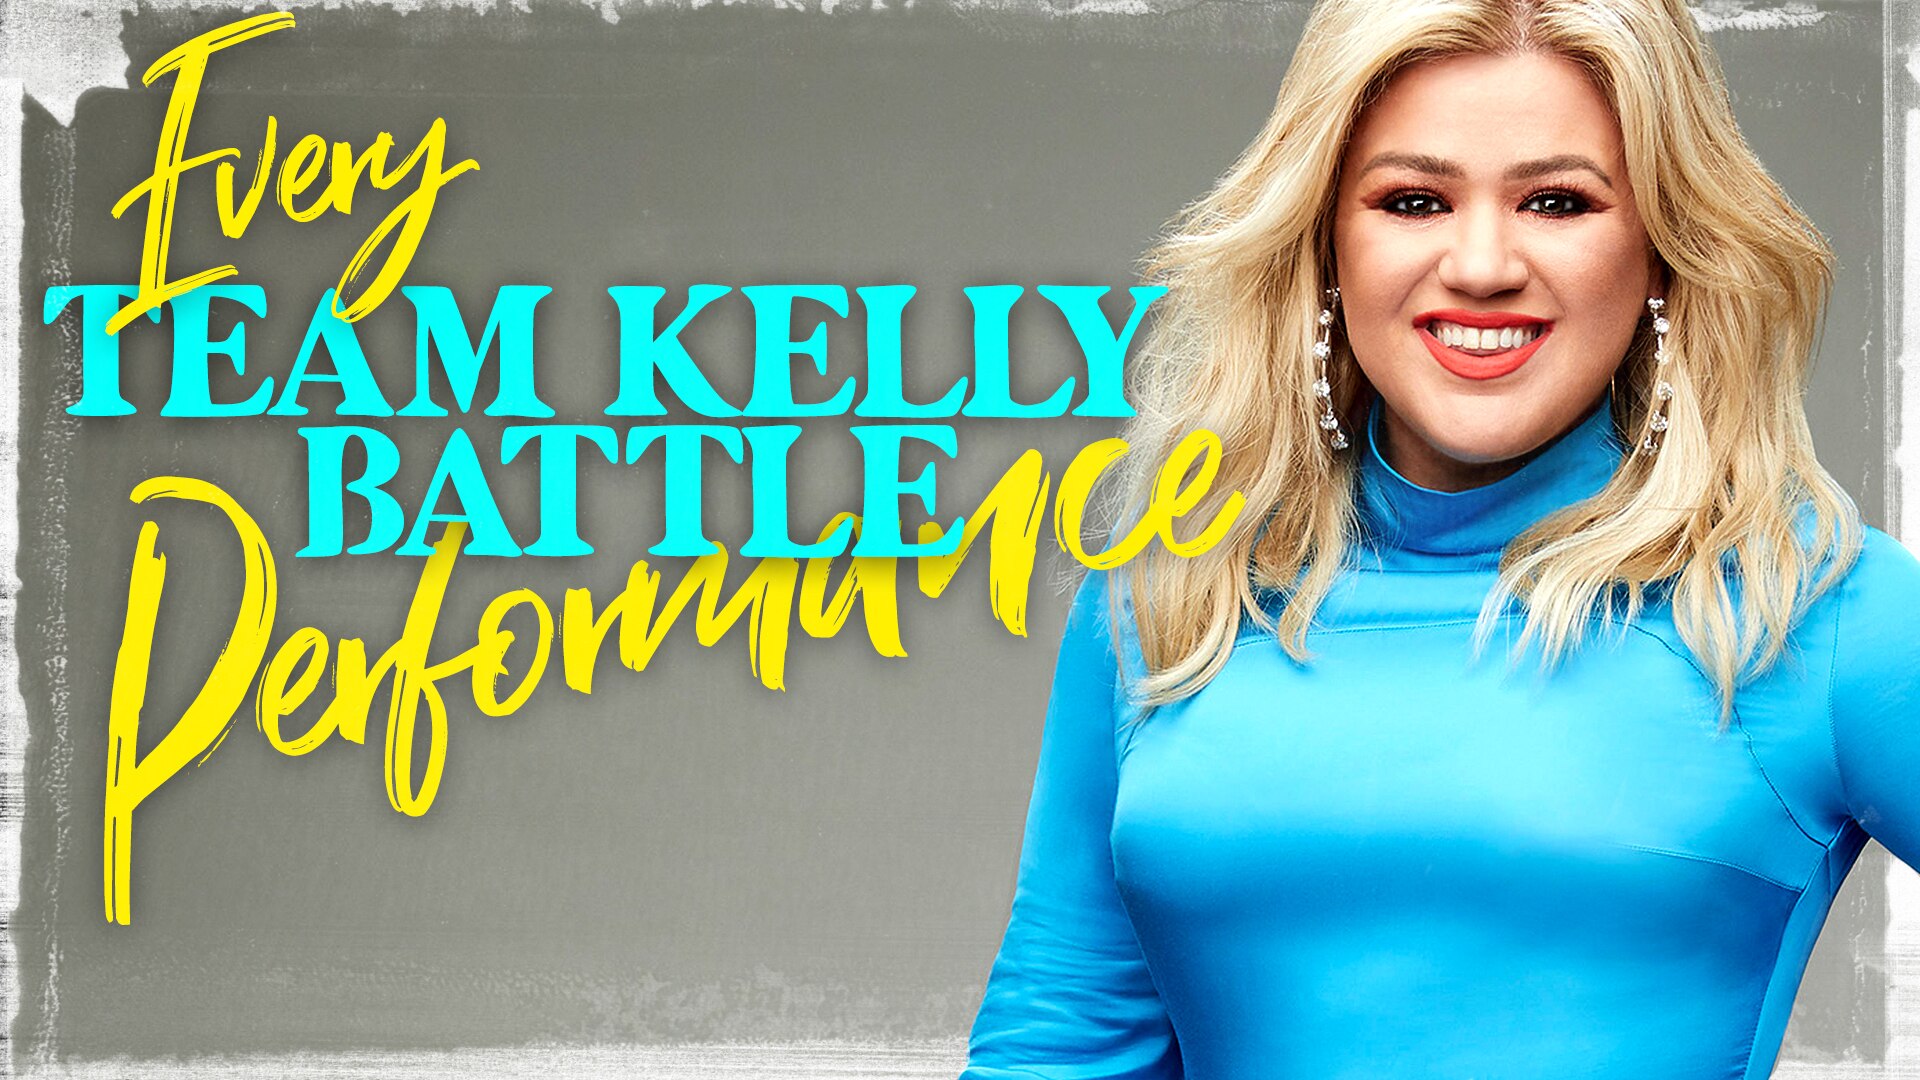 Watch The Voice Web Exclusive Every Team Kelly Battle from Season 18